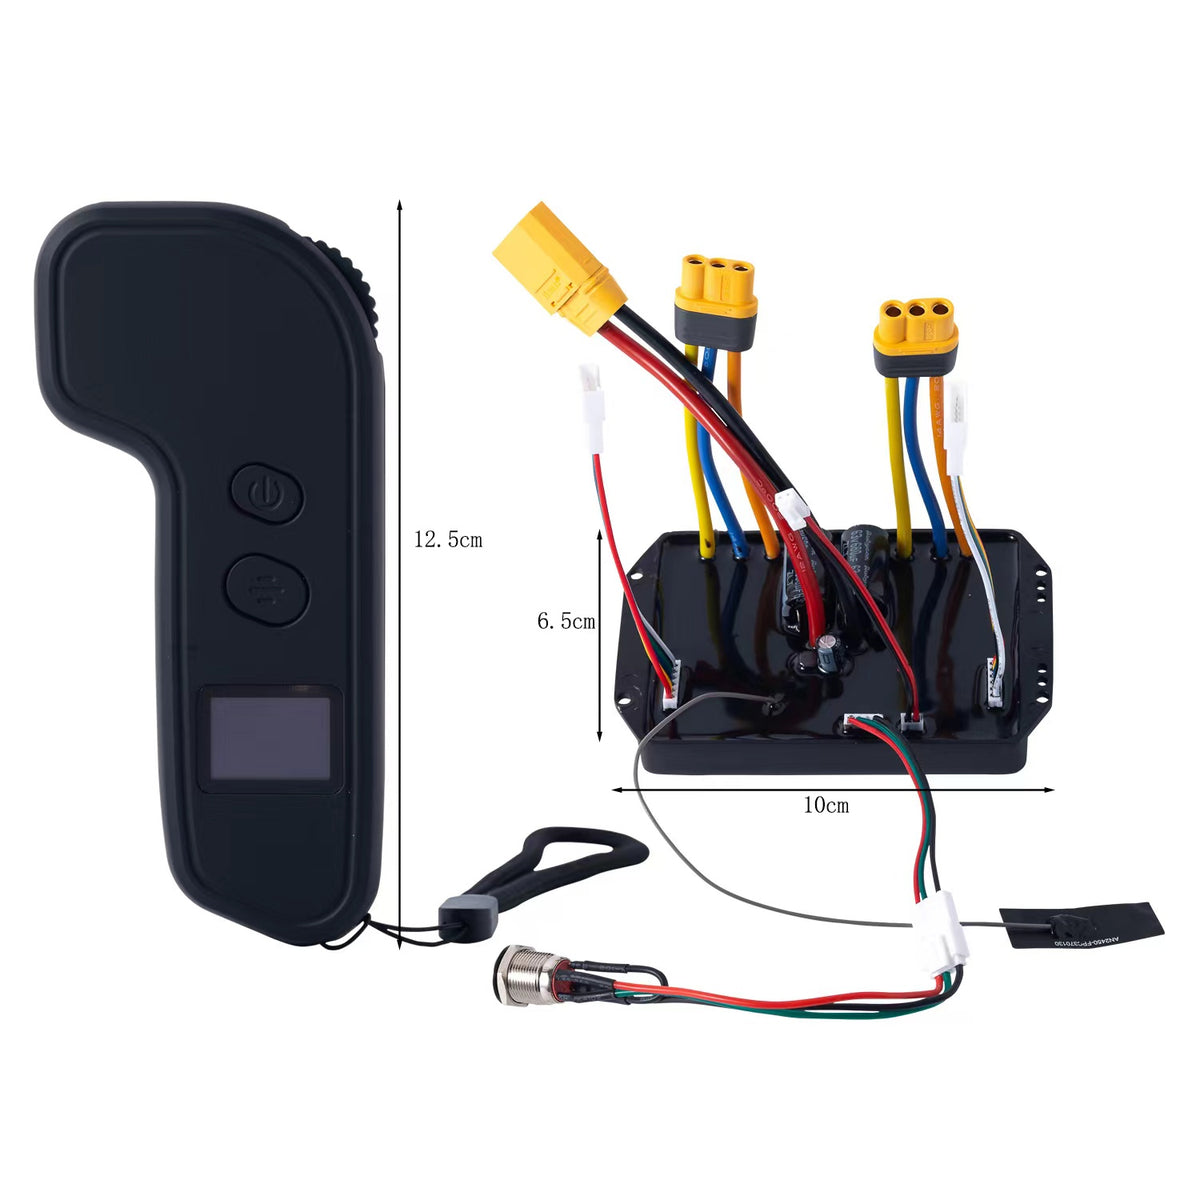 Verreal 60A FOC ESC(Electronics Speed Controller) & Remote Controller Combo for Electric Skateboards W/ Self Learning Motor Specs